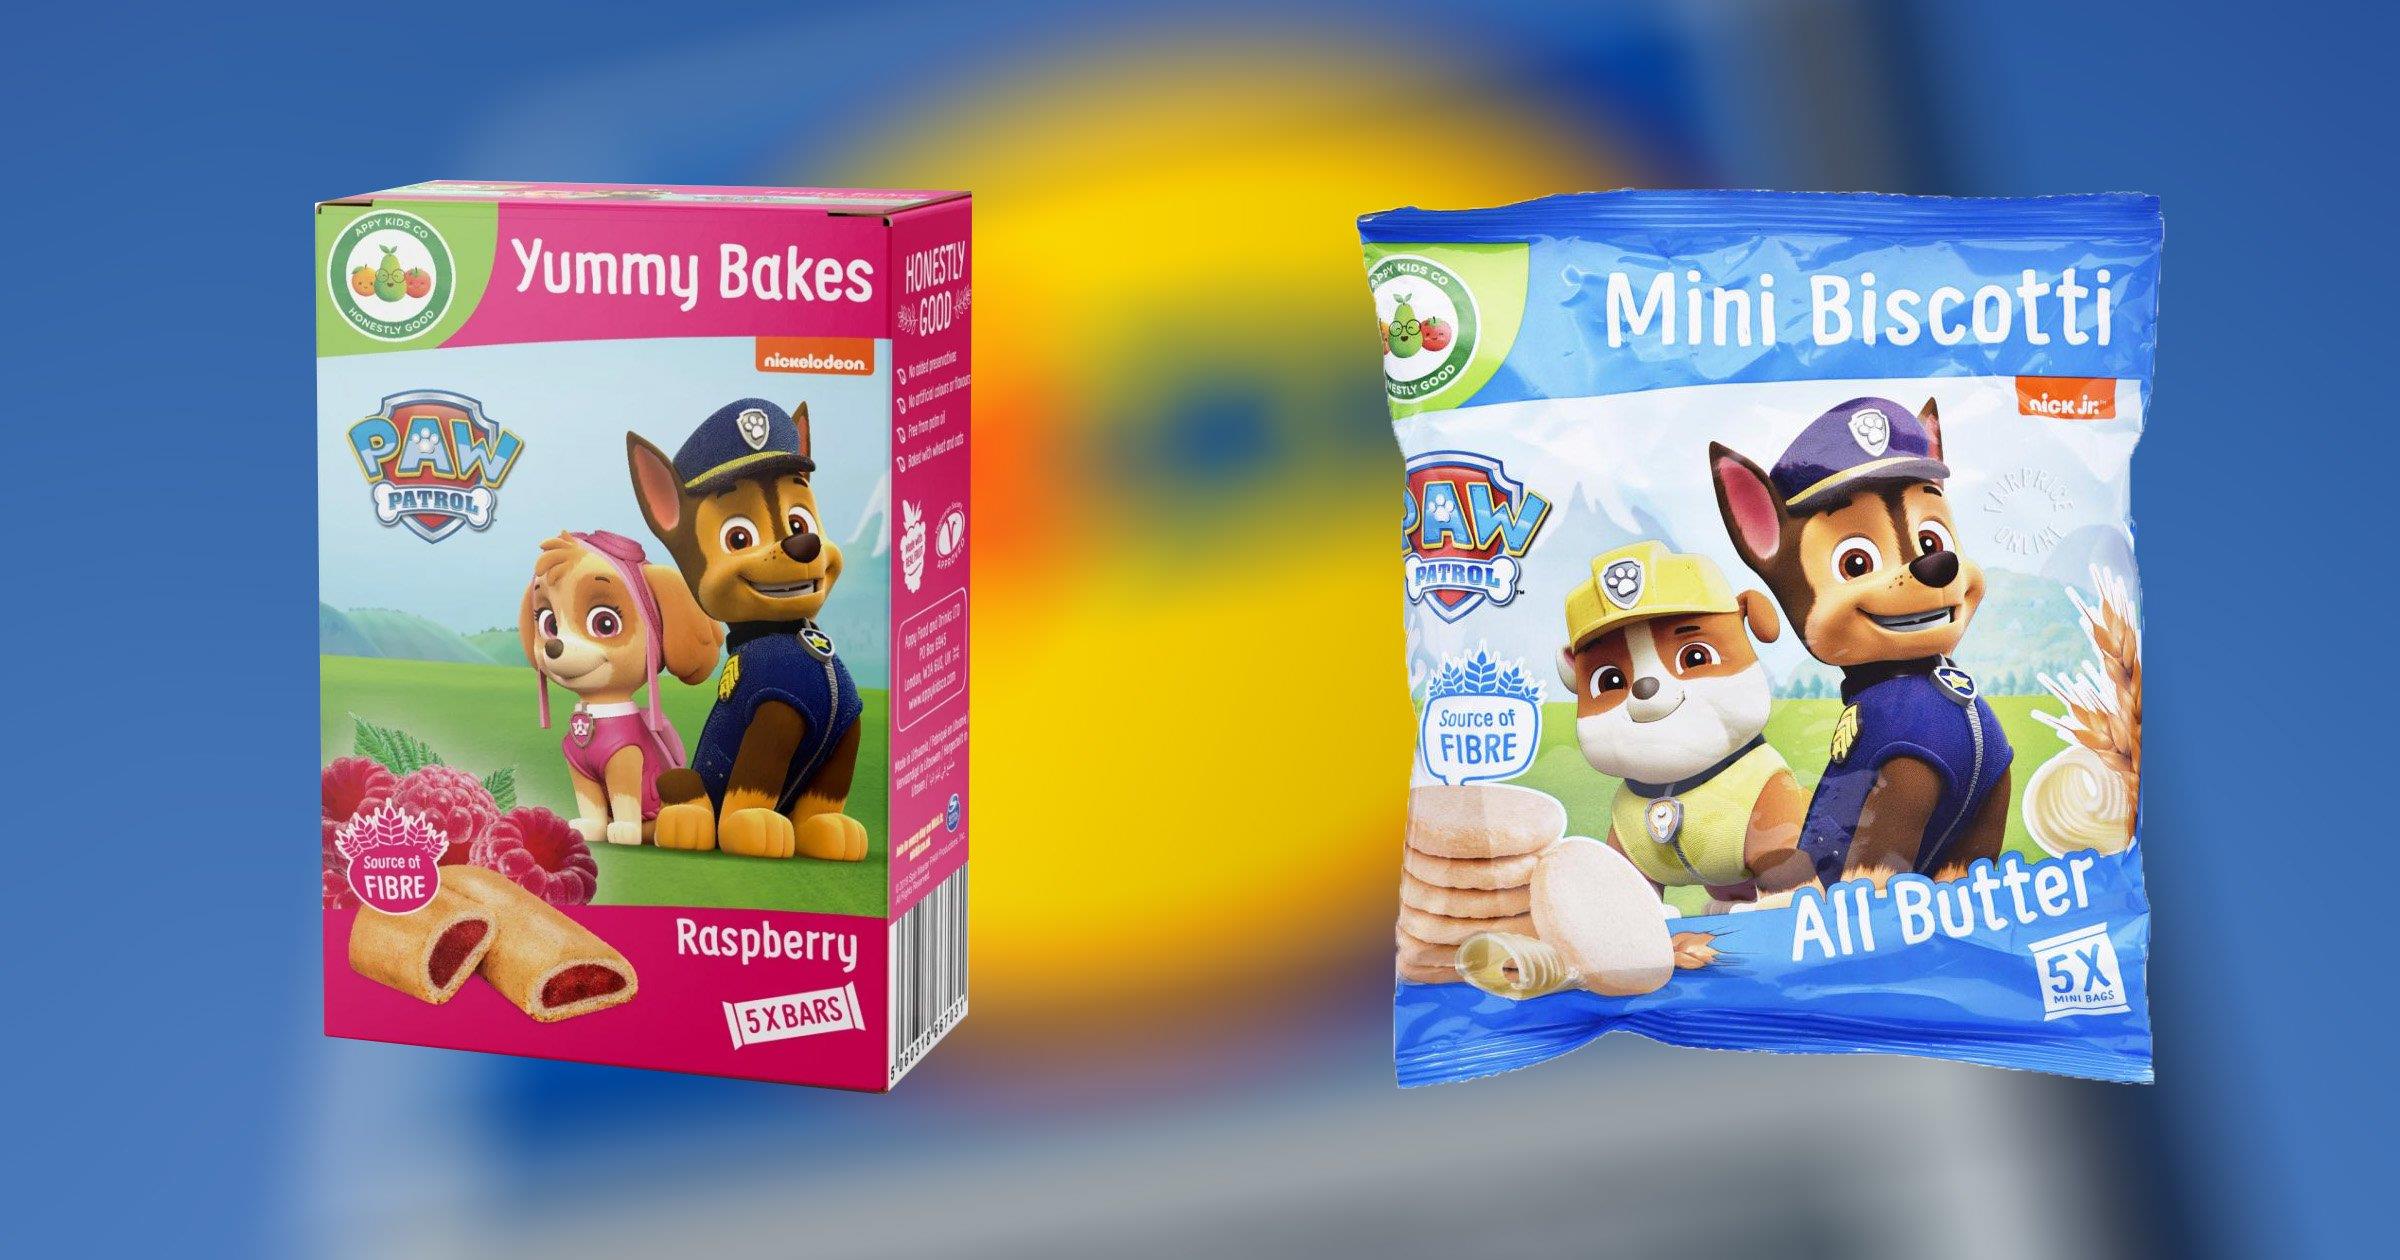 Lidl Recalls Paw Patrol Snacks Due To Inappropriate Website Display